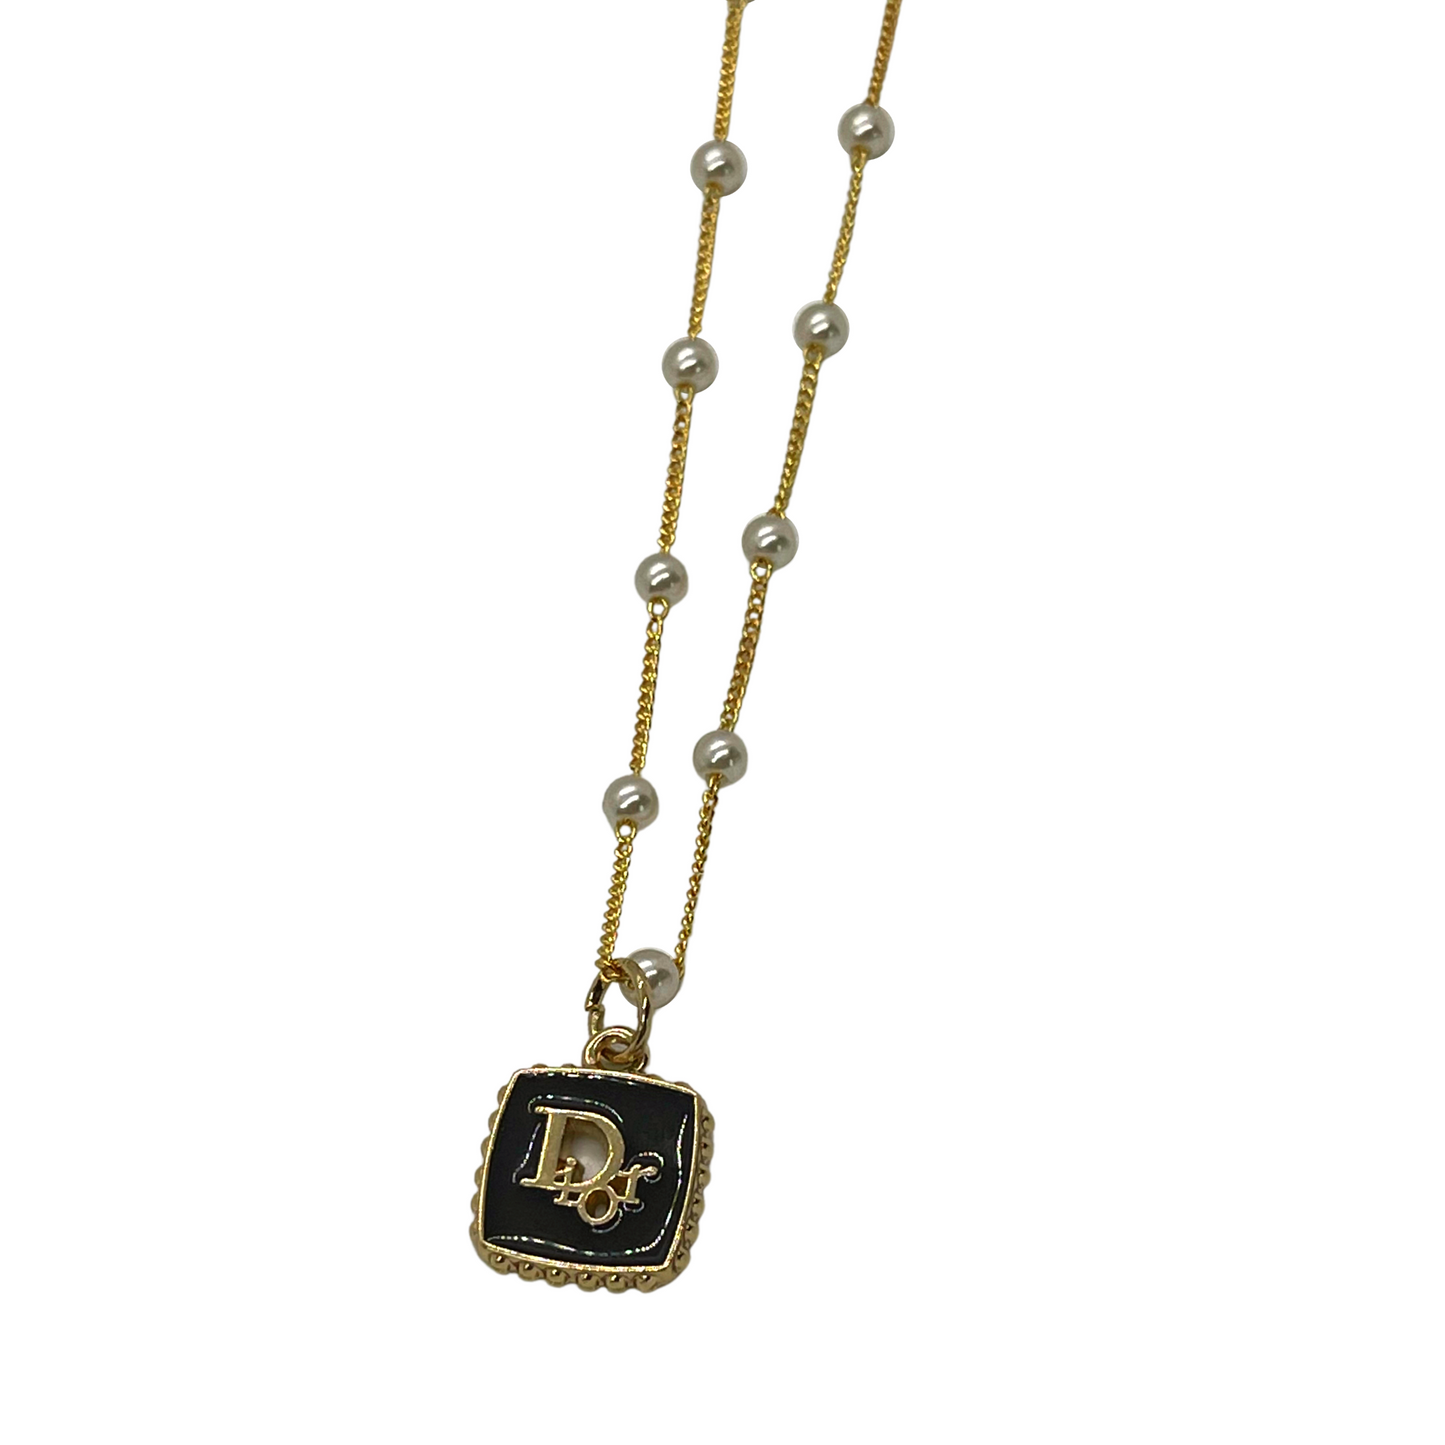 Authentic Dior Black Square Pendant | Reworked Gold 13-15" Necklace